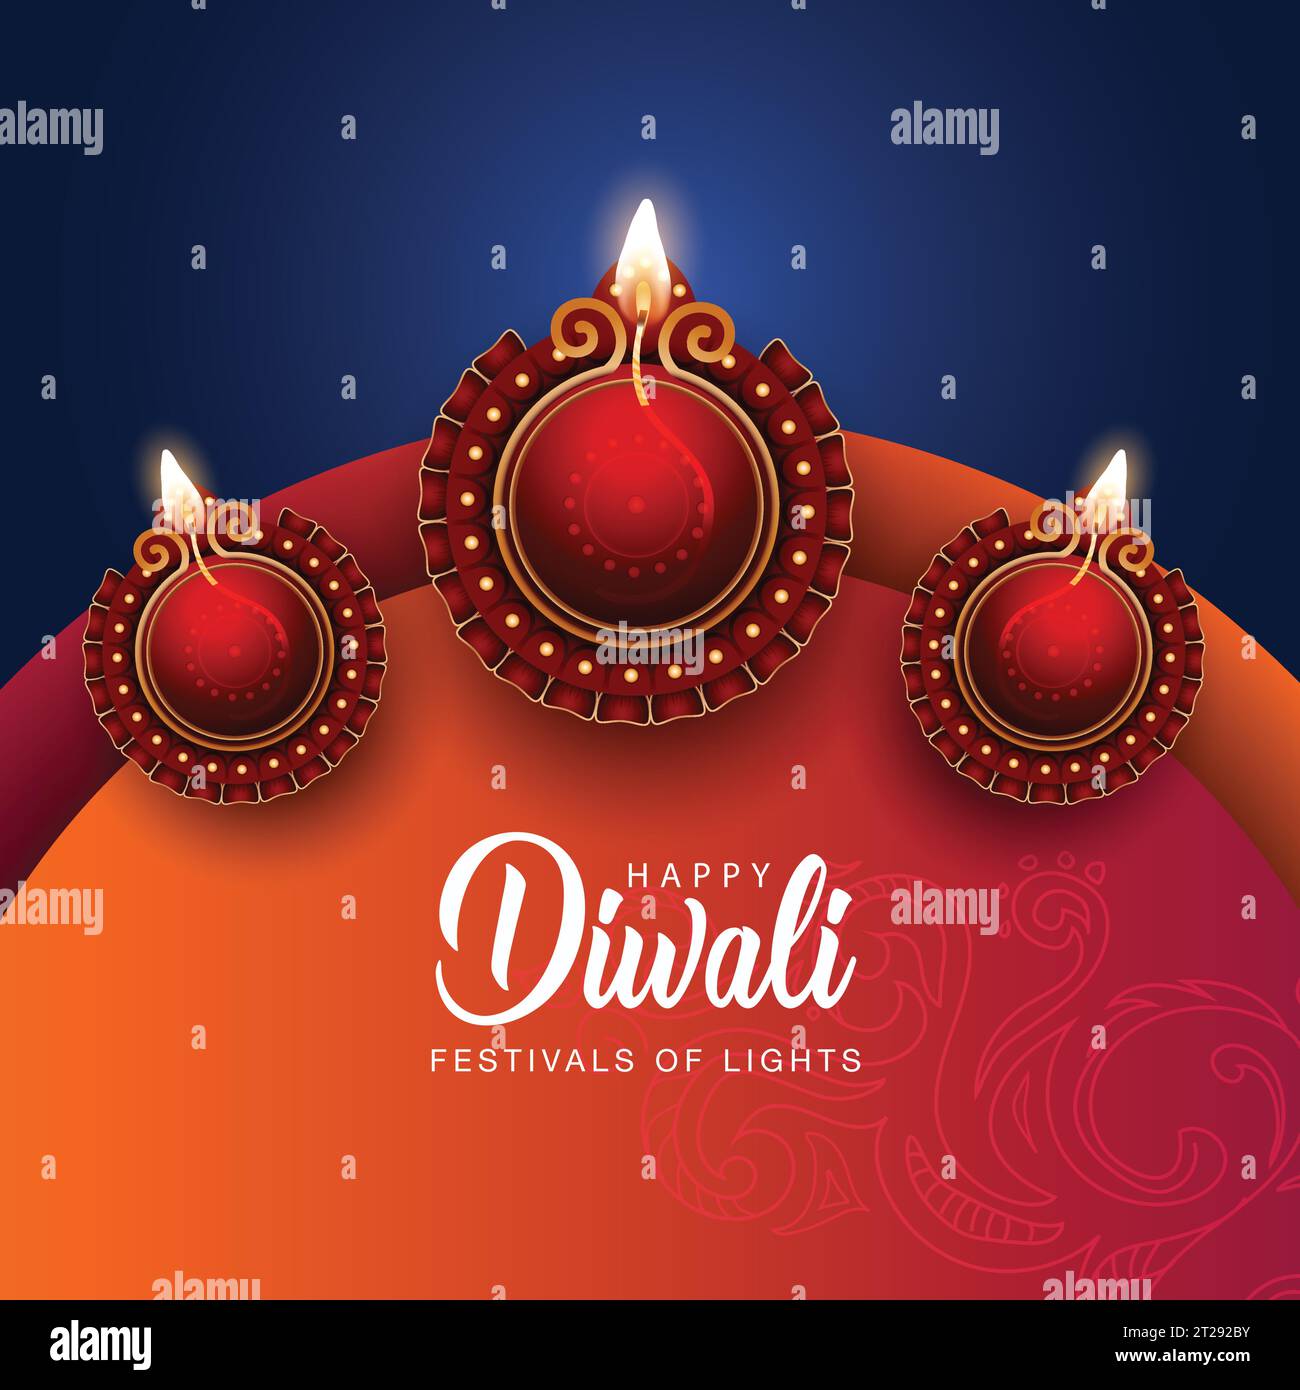 Happy Diwali celebration background. Top view of banner design decorated with illuminated oil lamps on patterned dark background. vector illustration Stock Vector